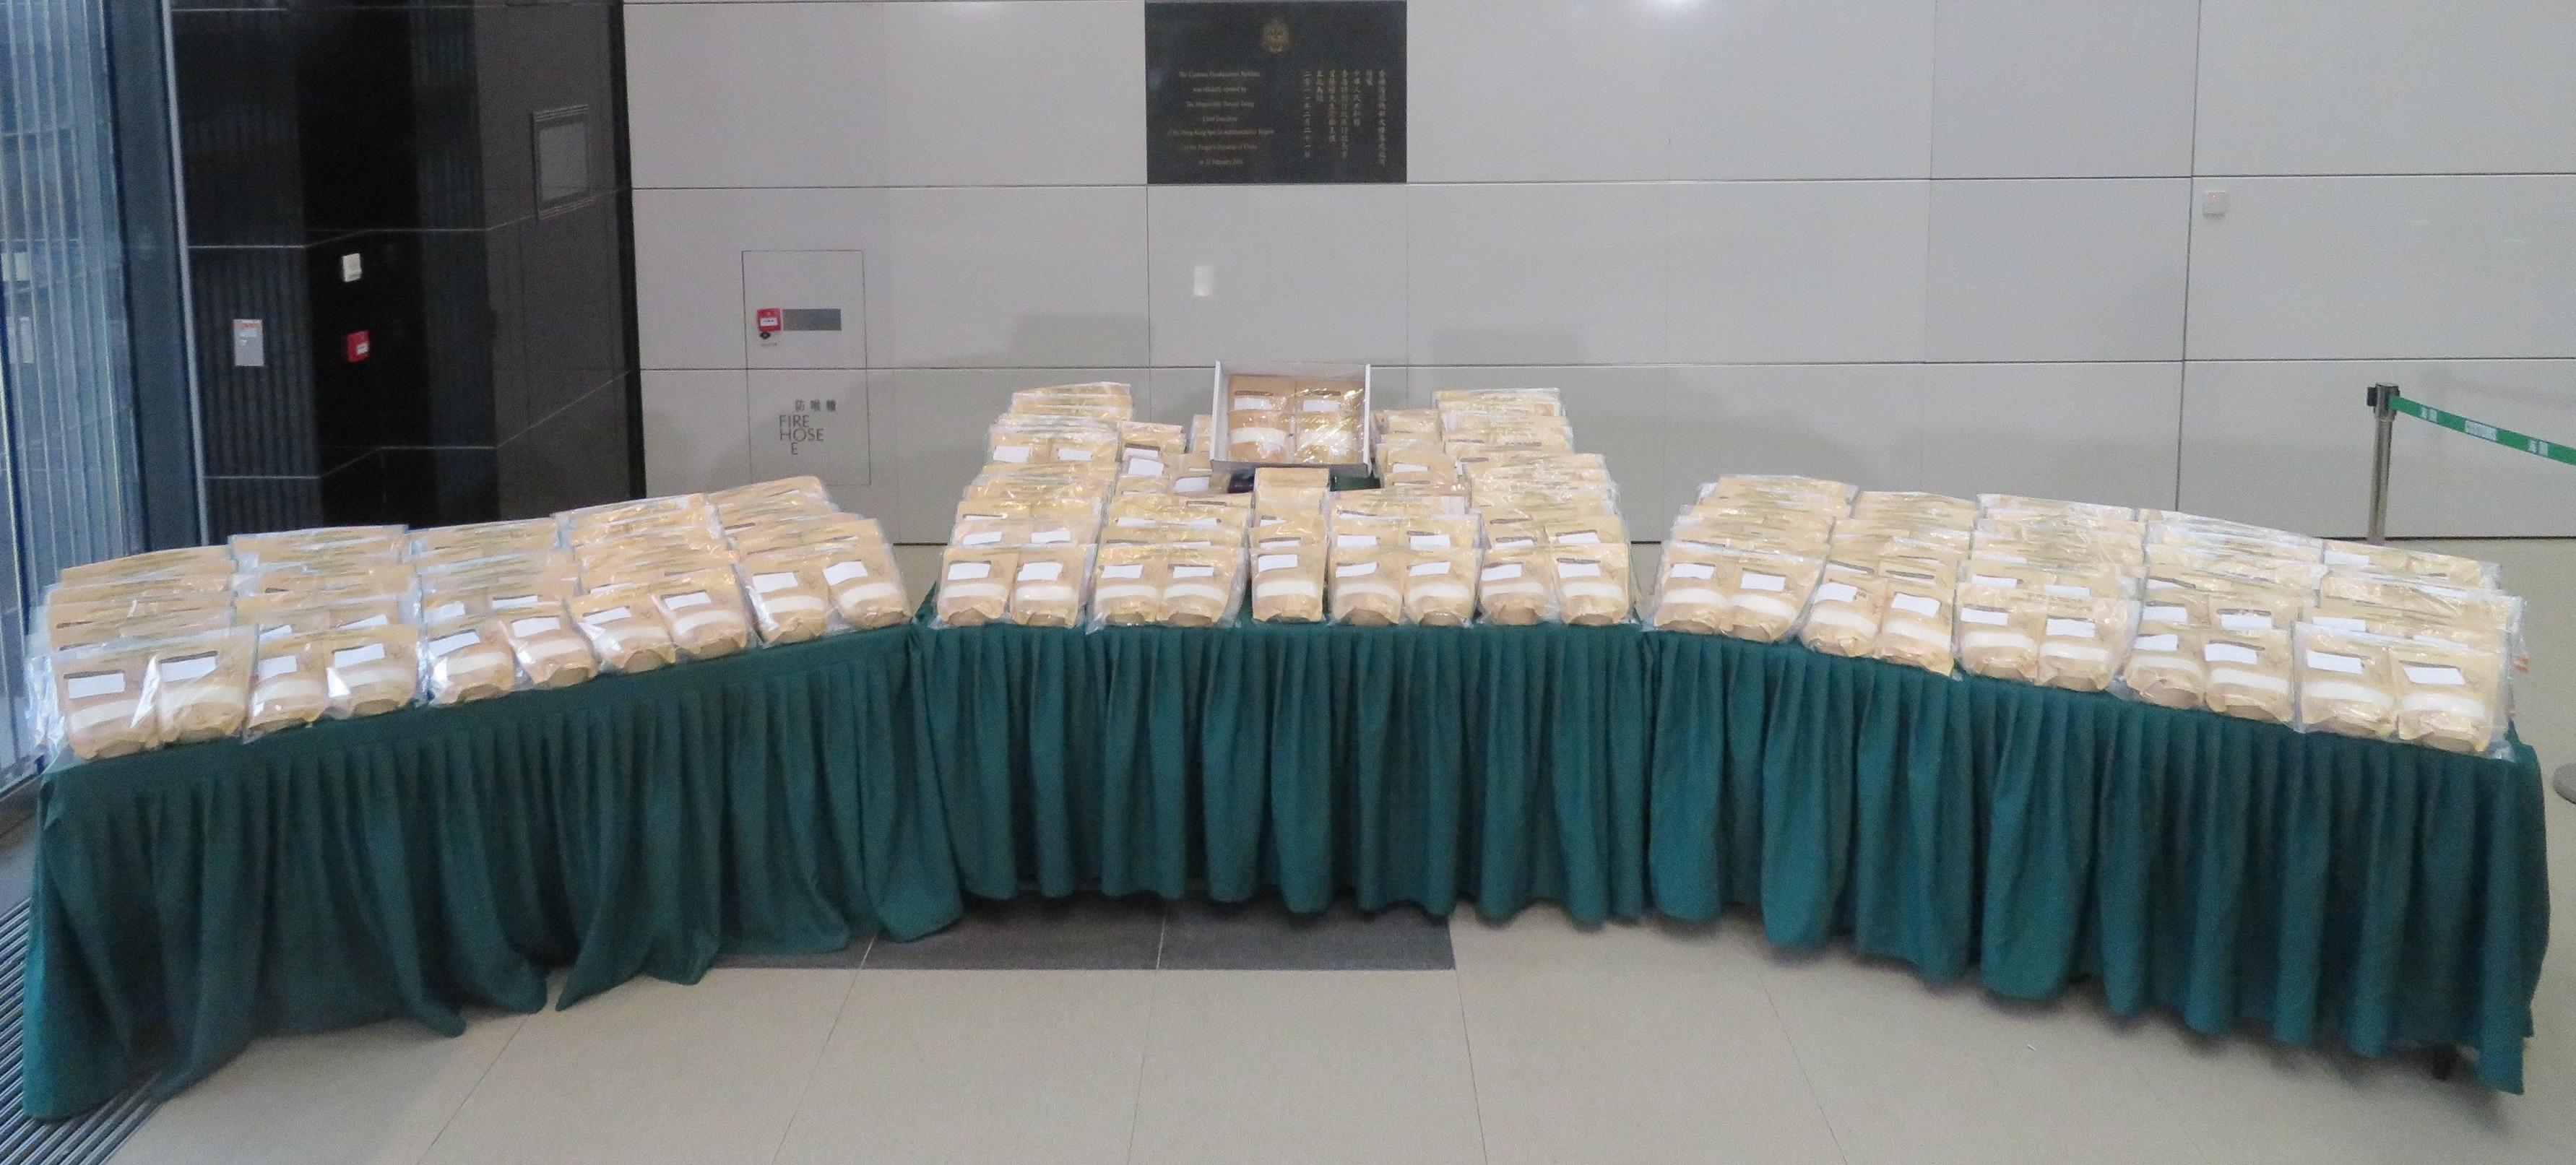 Hong Kong Customs detected a large-scale cocaine trafficking case on November 4 and seized about 240 kilograms of suspected cocaine with an estimated market value of about $210 million in Yuen Long. Photo shows the suspected cocaine seized.